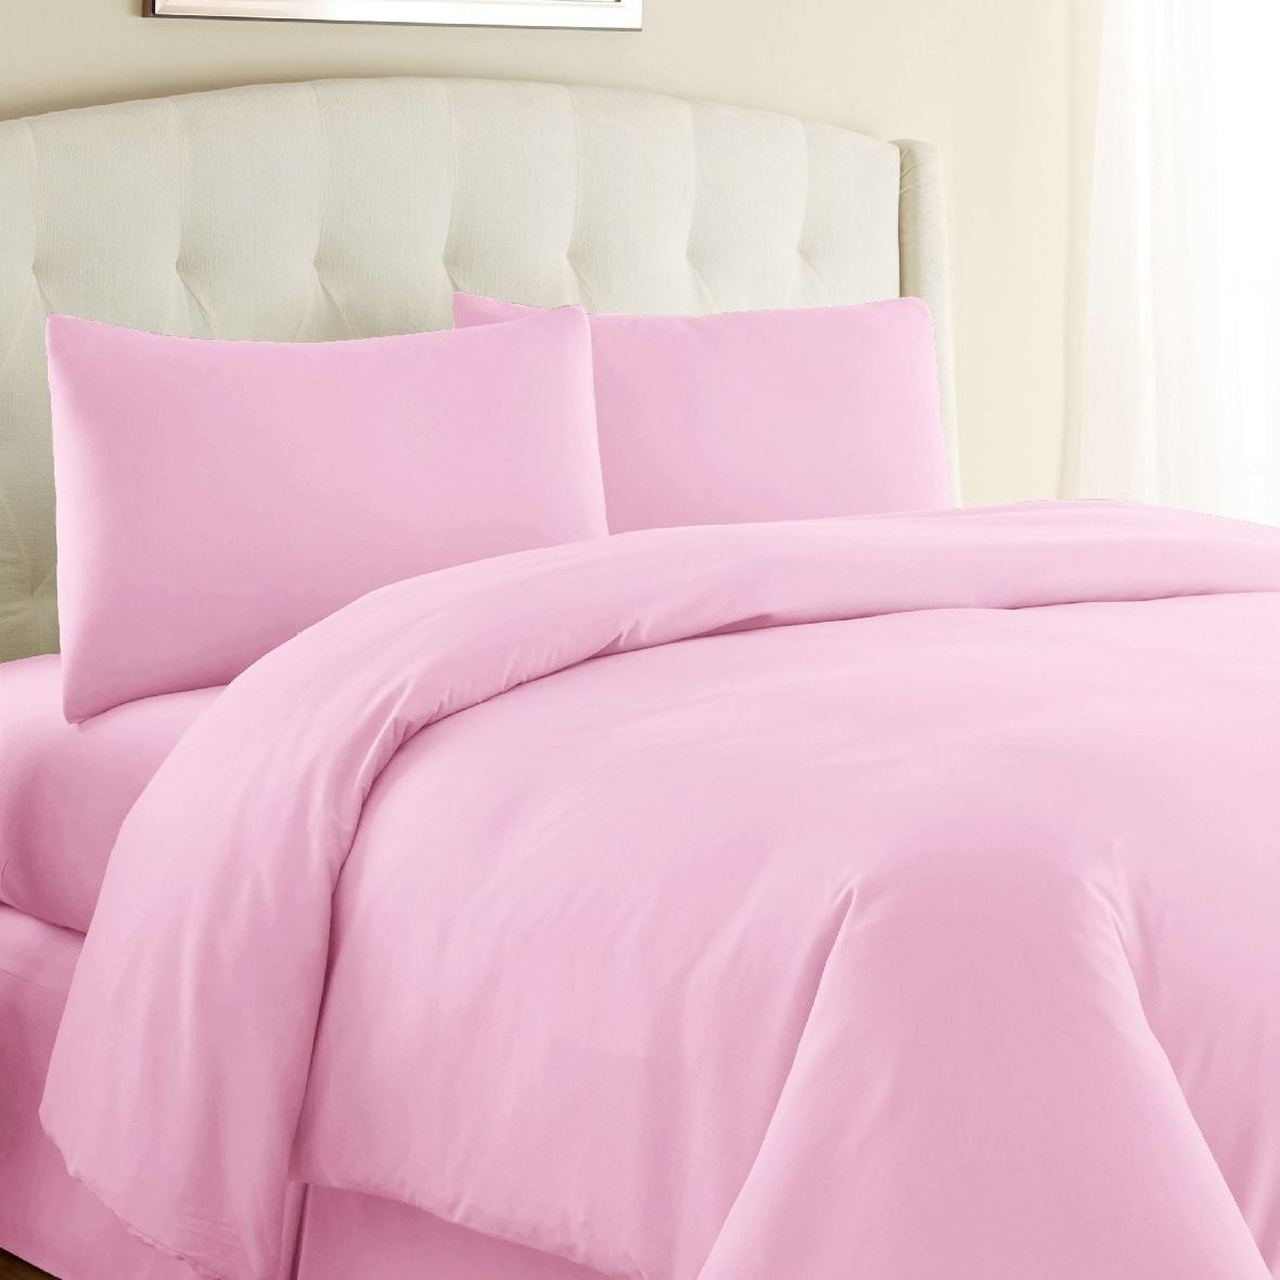 Baby Pink Duvet Cover With 4 Pillows, Pale Pink Duvet Cover